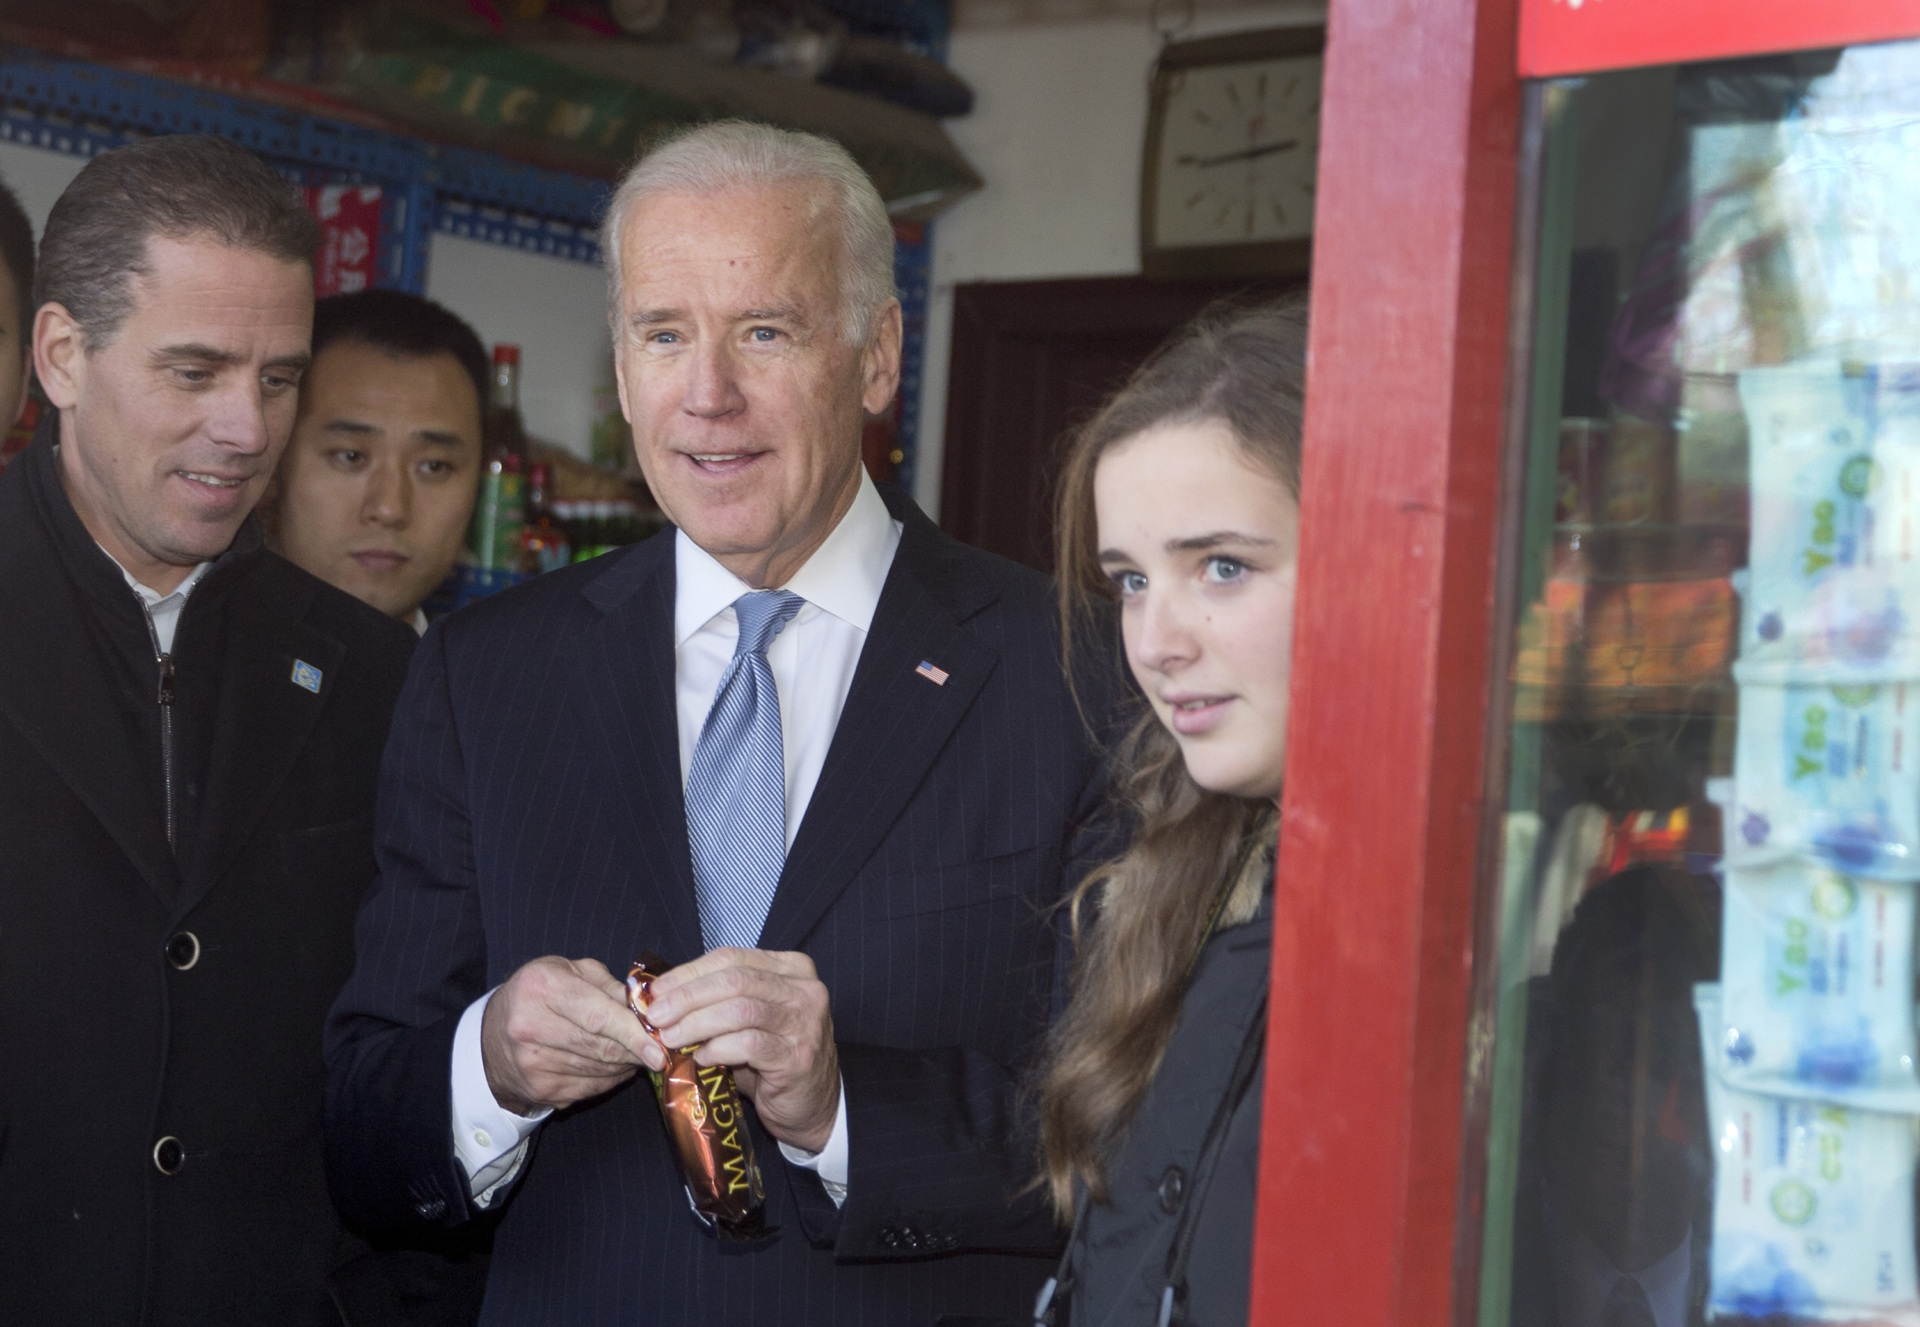 "This will be the second article of Biden's impeachment"